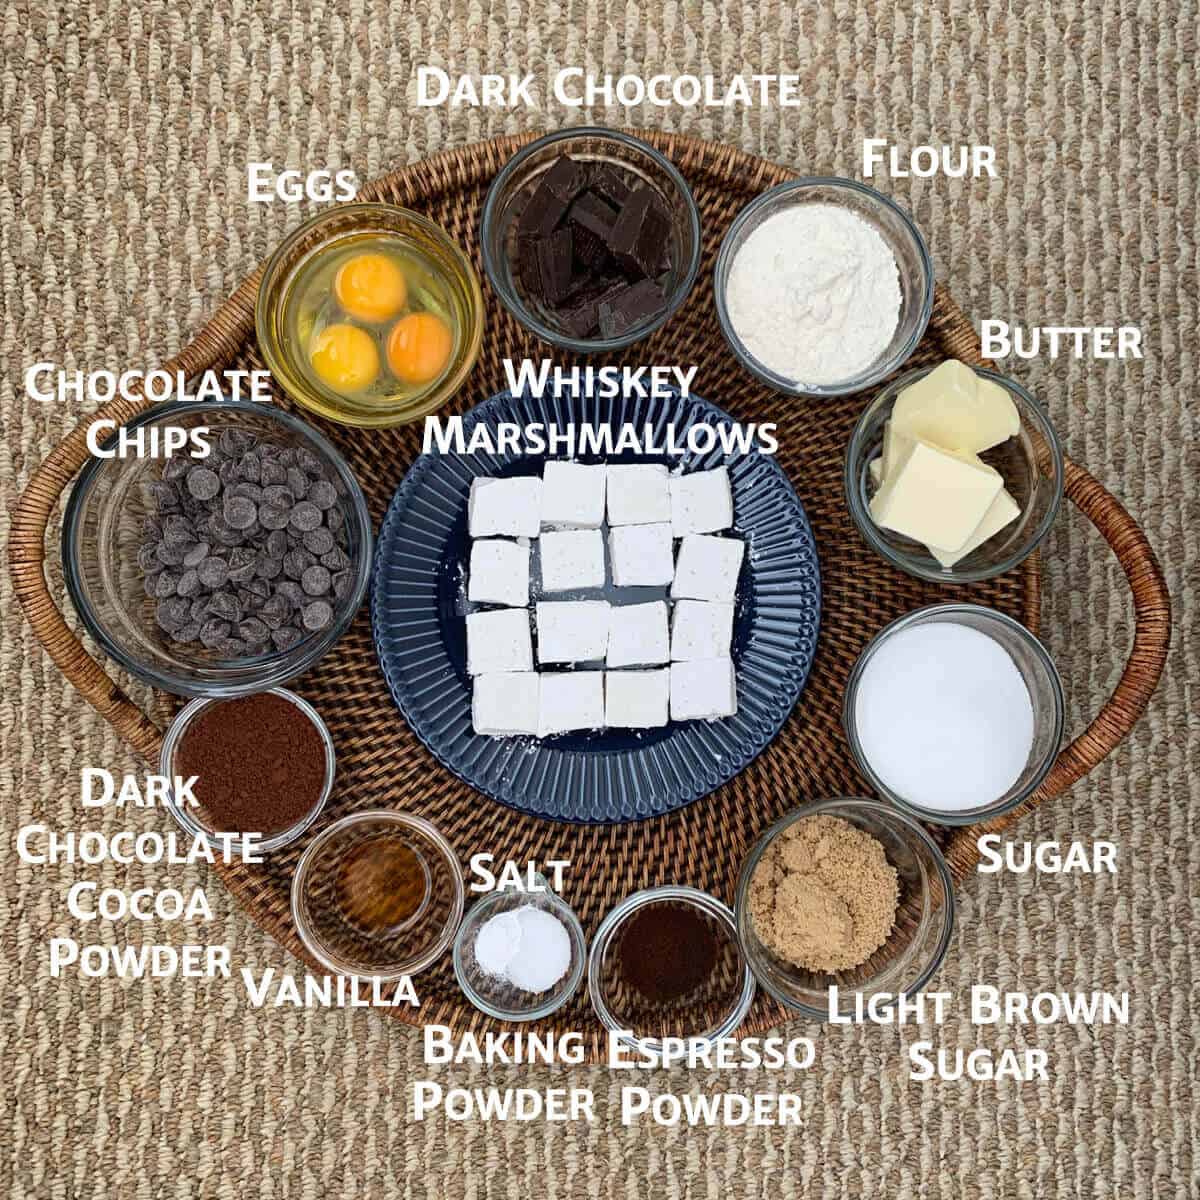 Whiskey Marshmallow Brownie ingredients portioned into bowls on a woven tray from overhead.